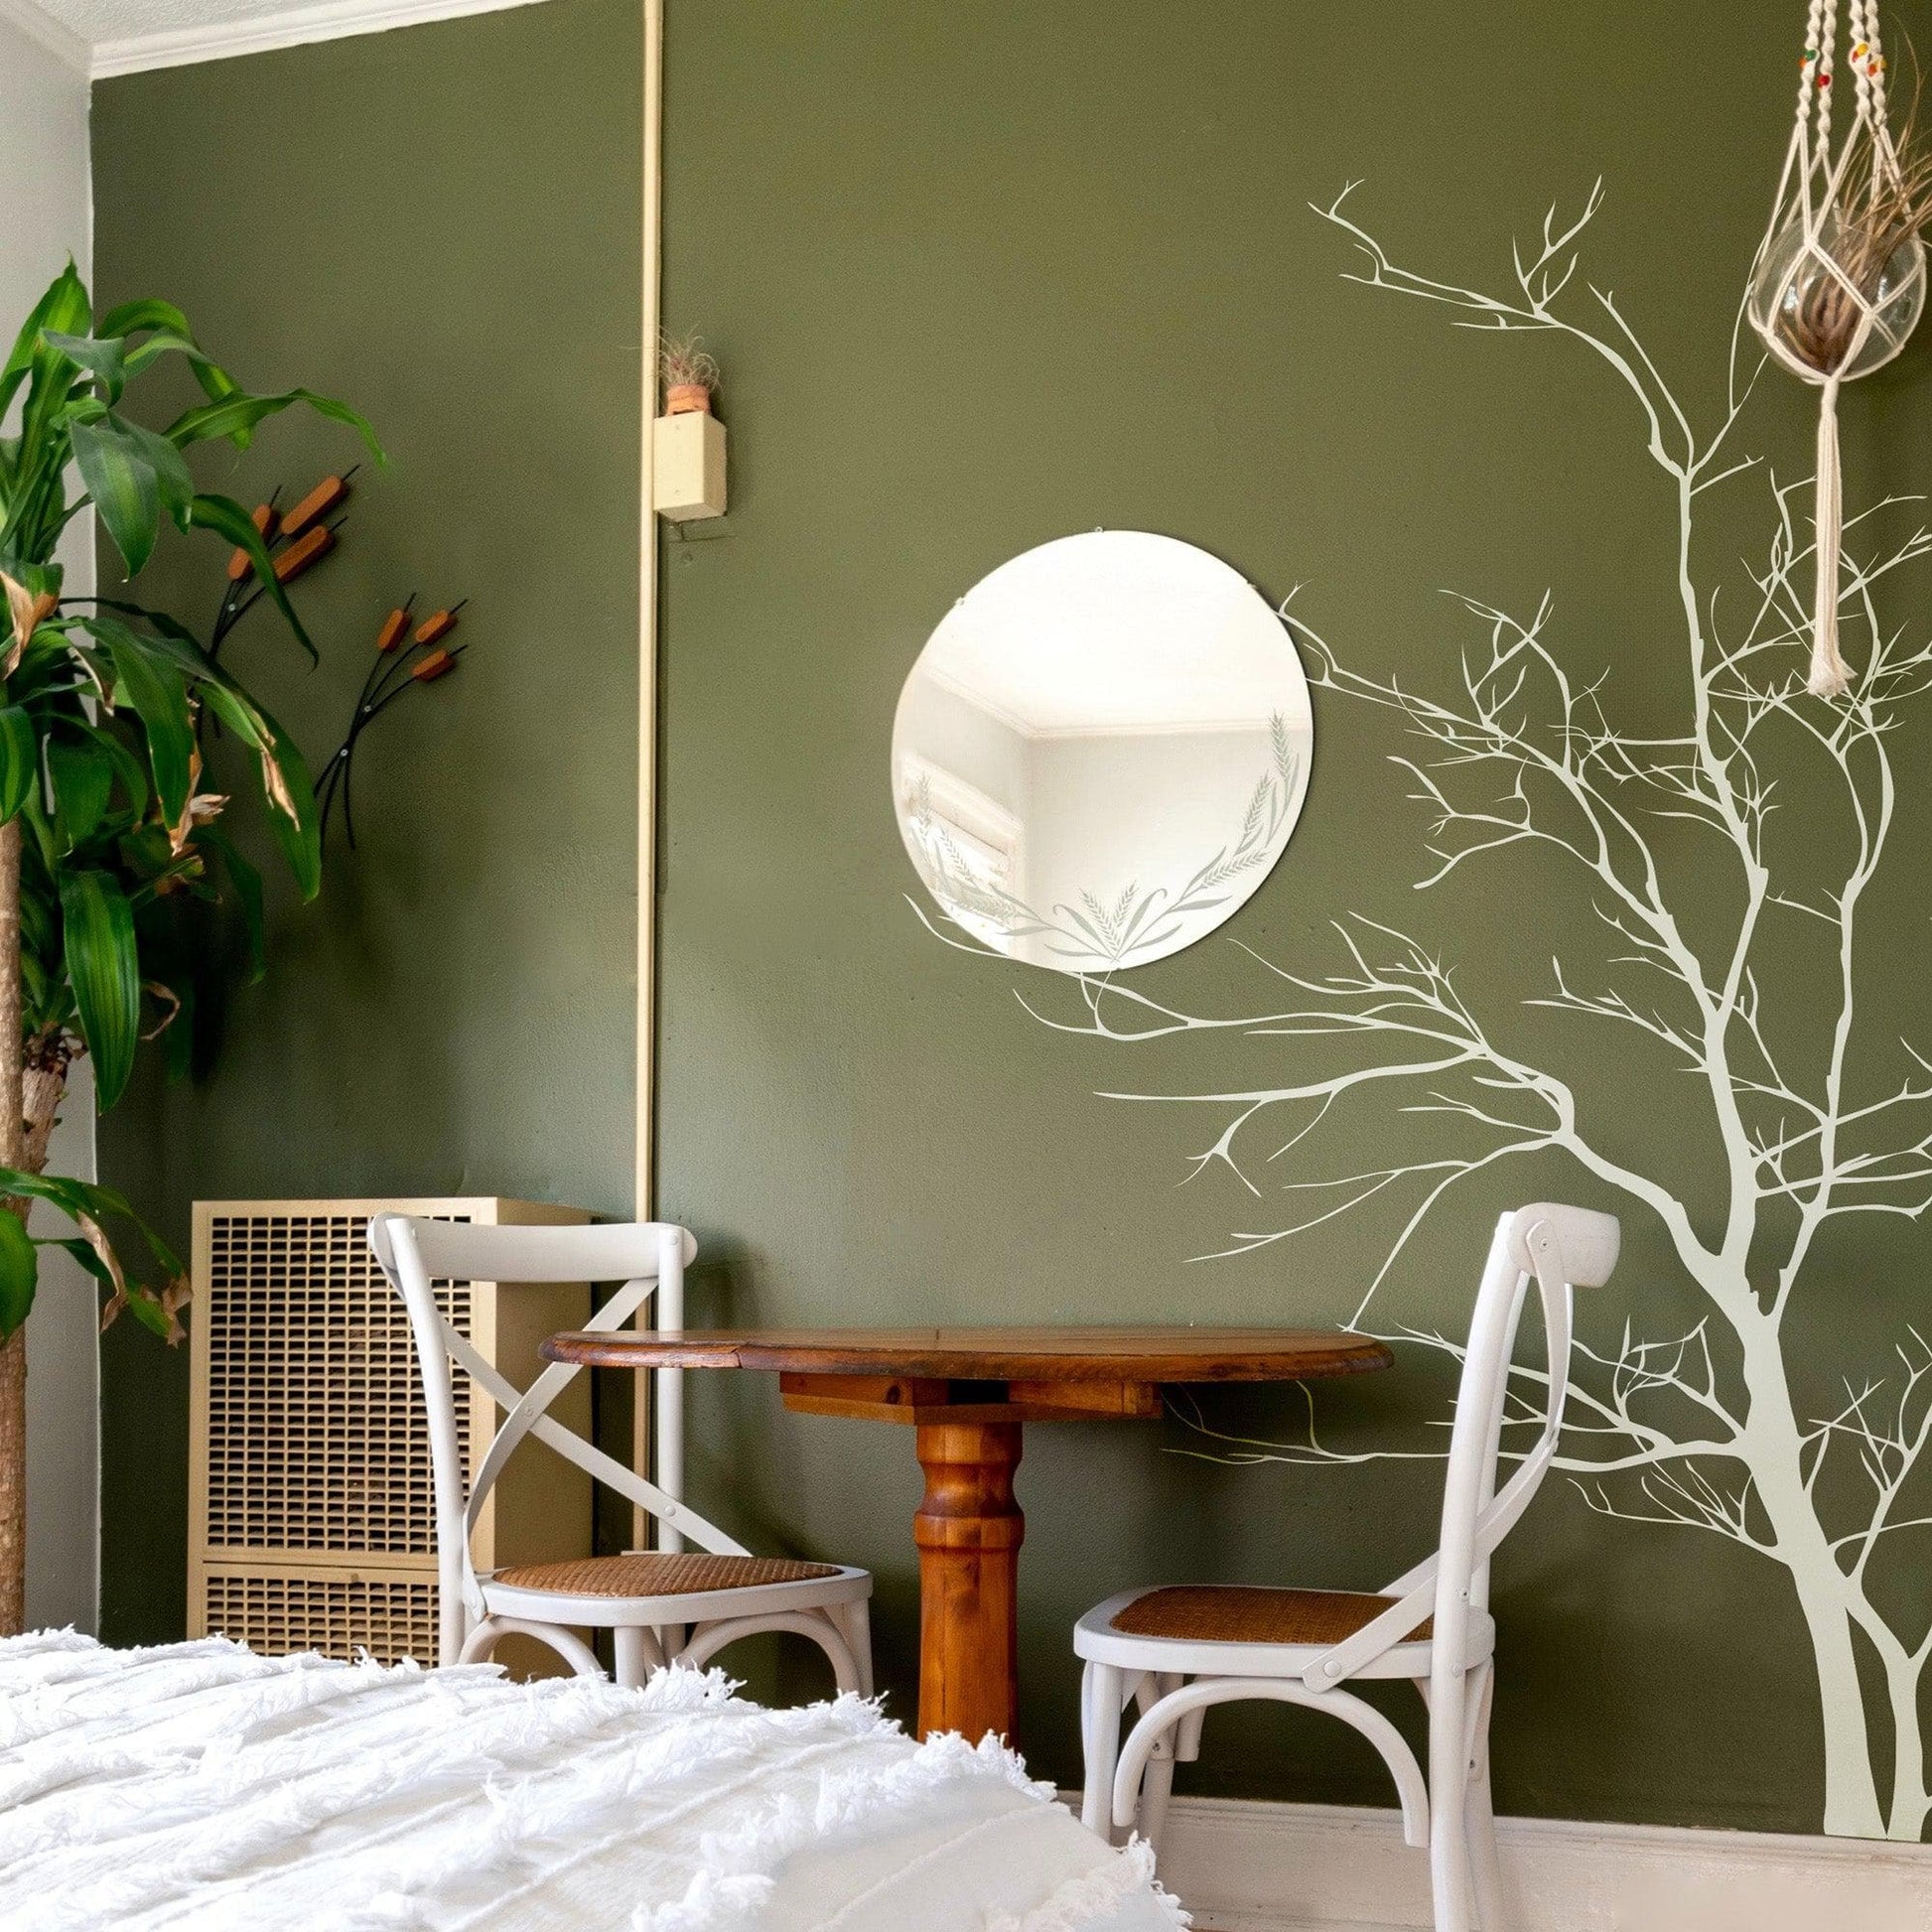 A white tree decal on a dark green wall in a bedroom above a brown table and two chairs, near a circular  mirror.